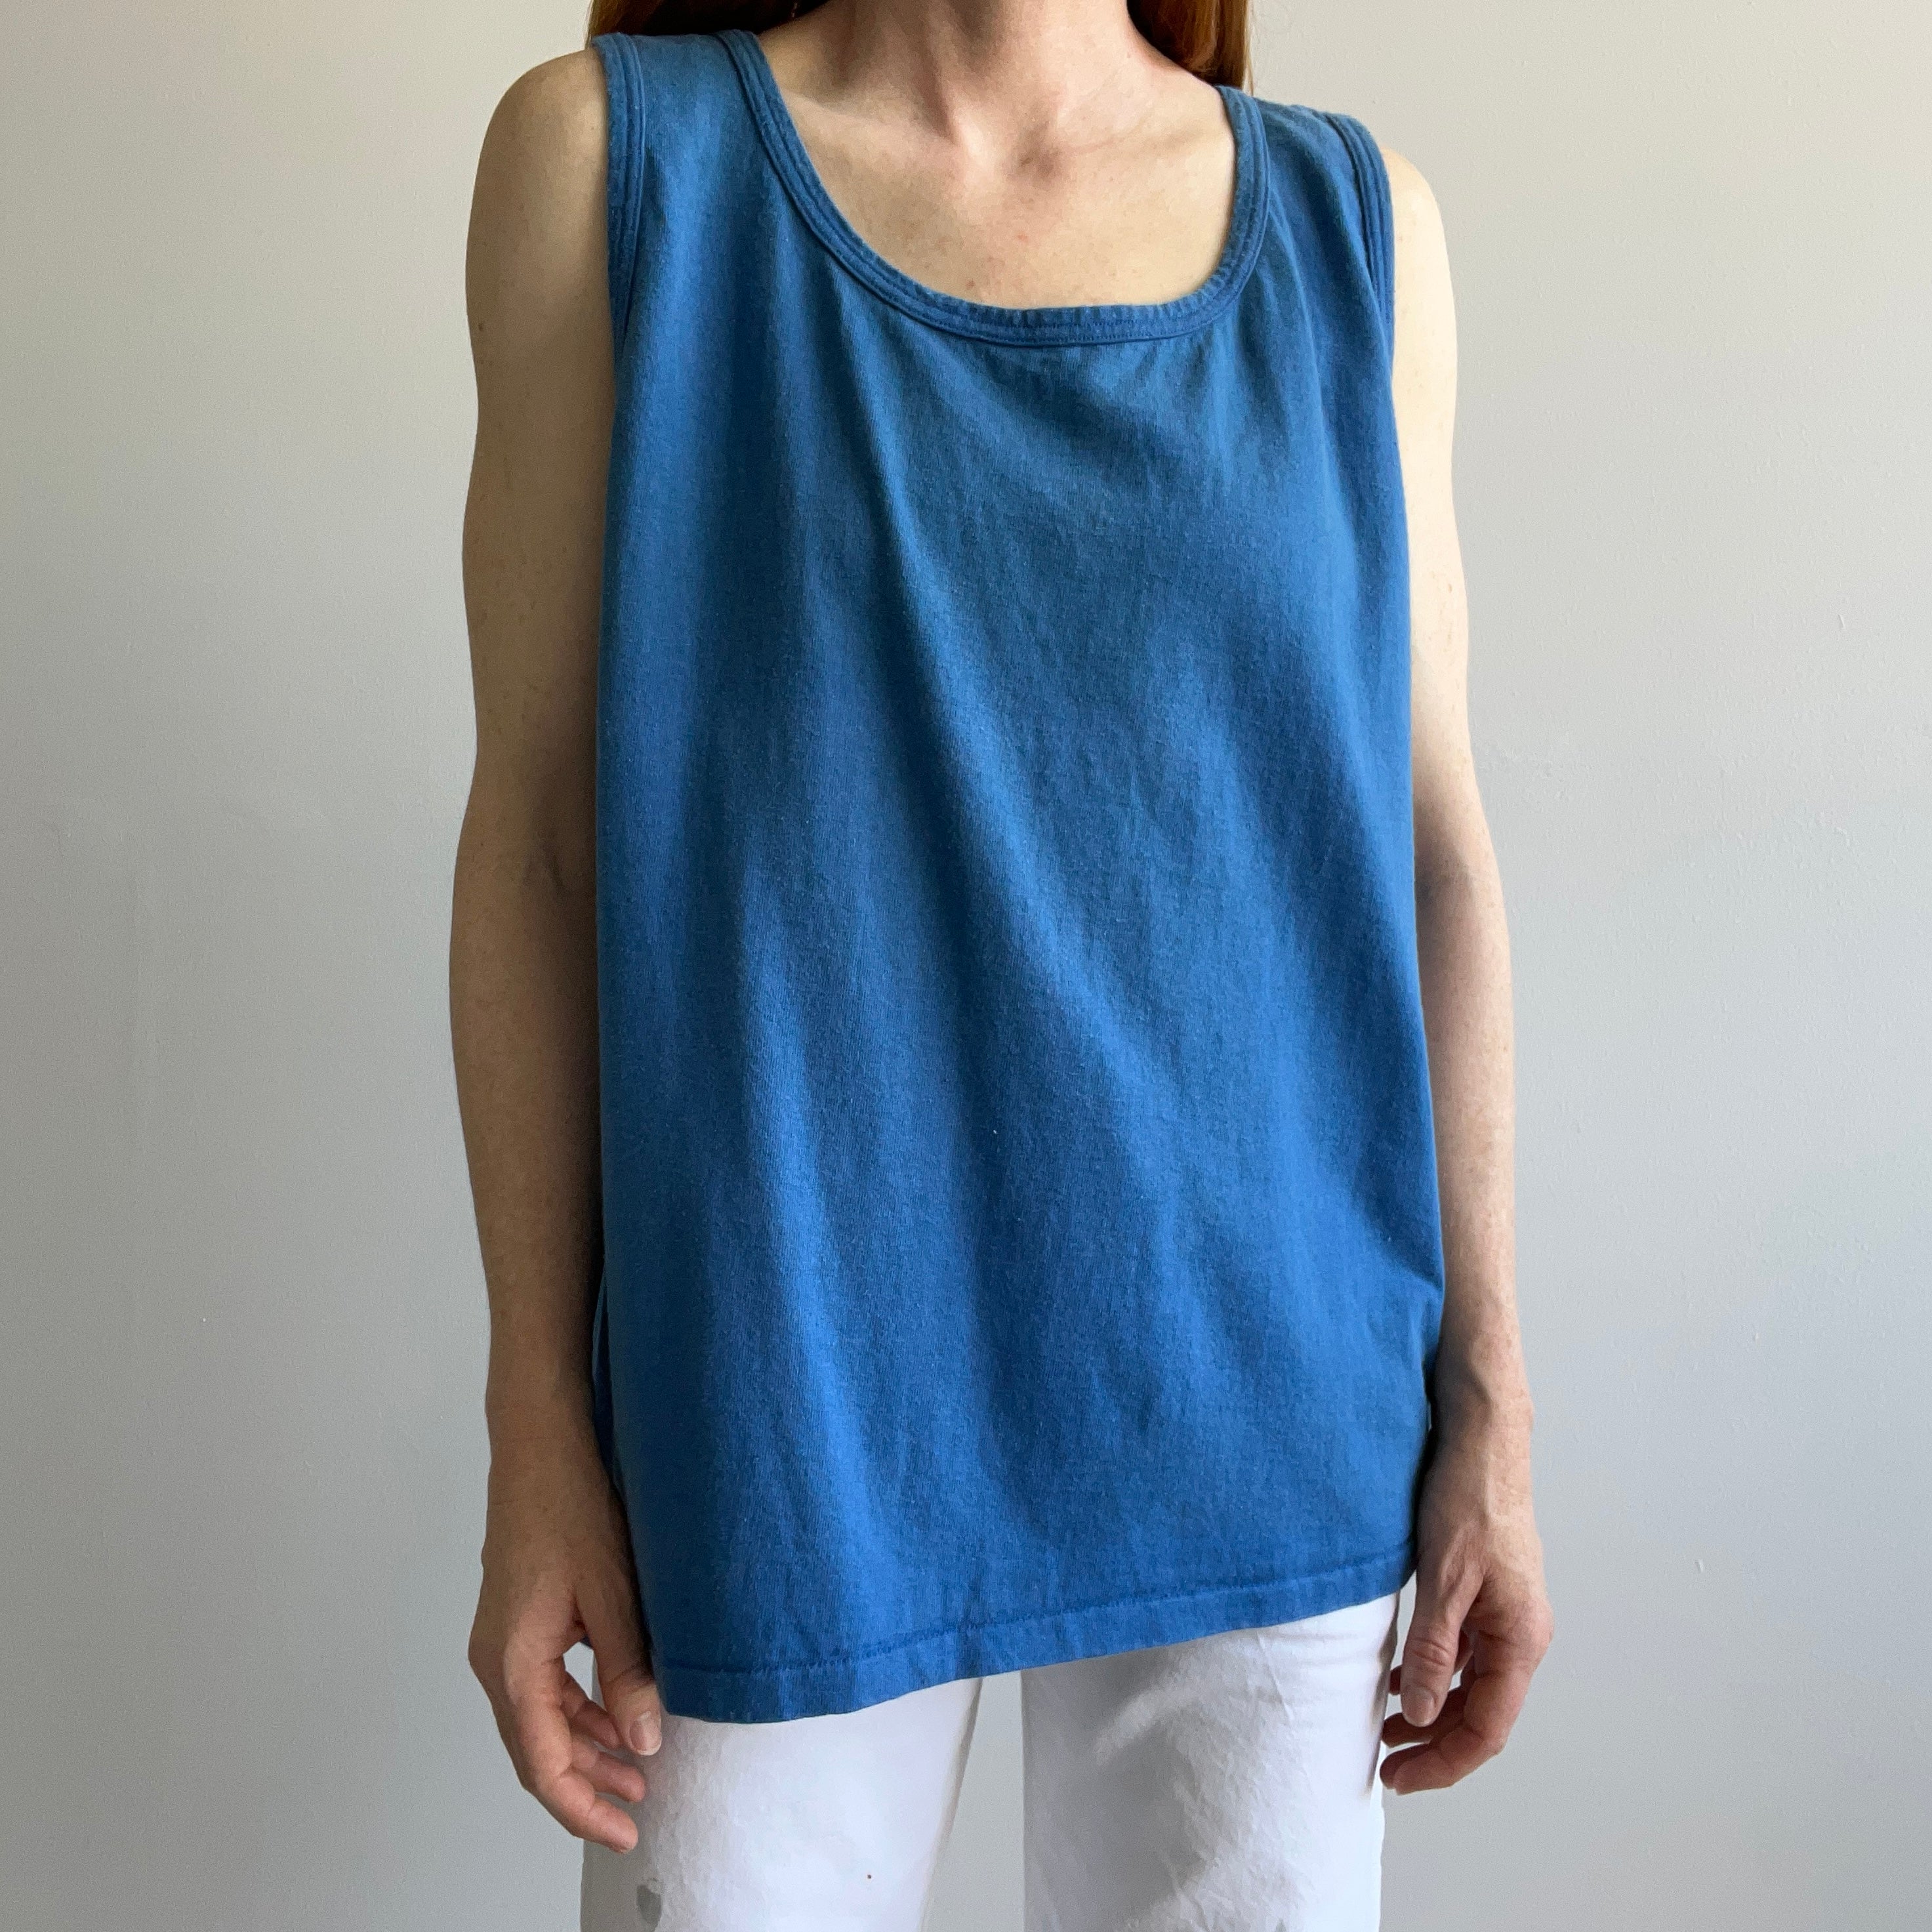 1980/90s Cotton Blue Tank Top by Starter